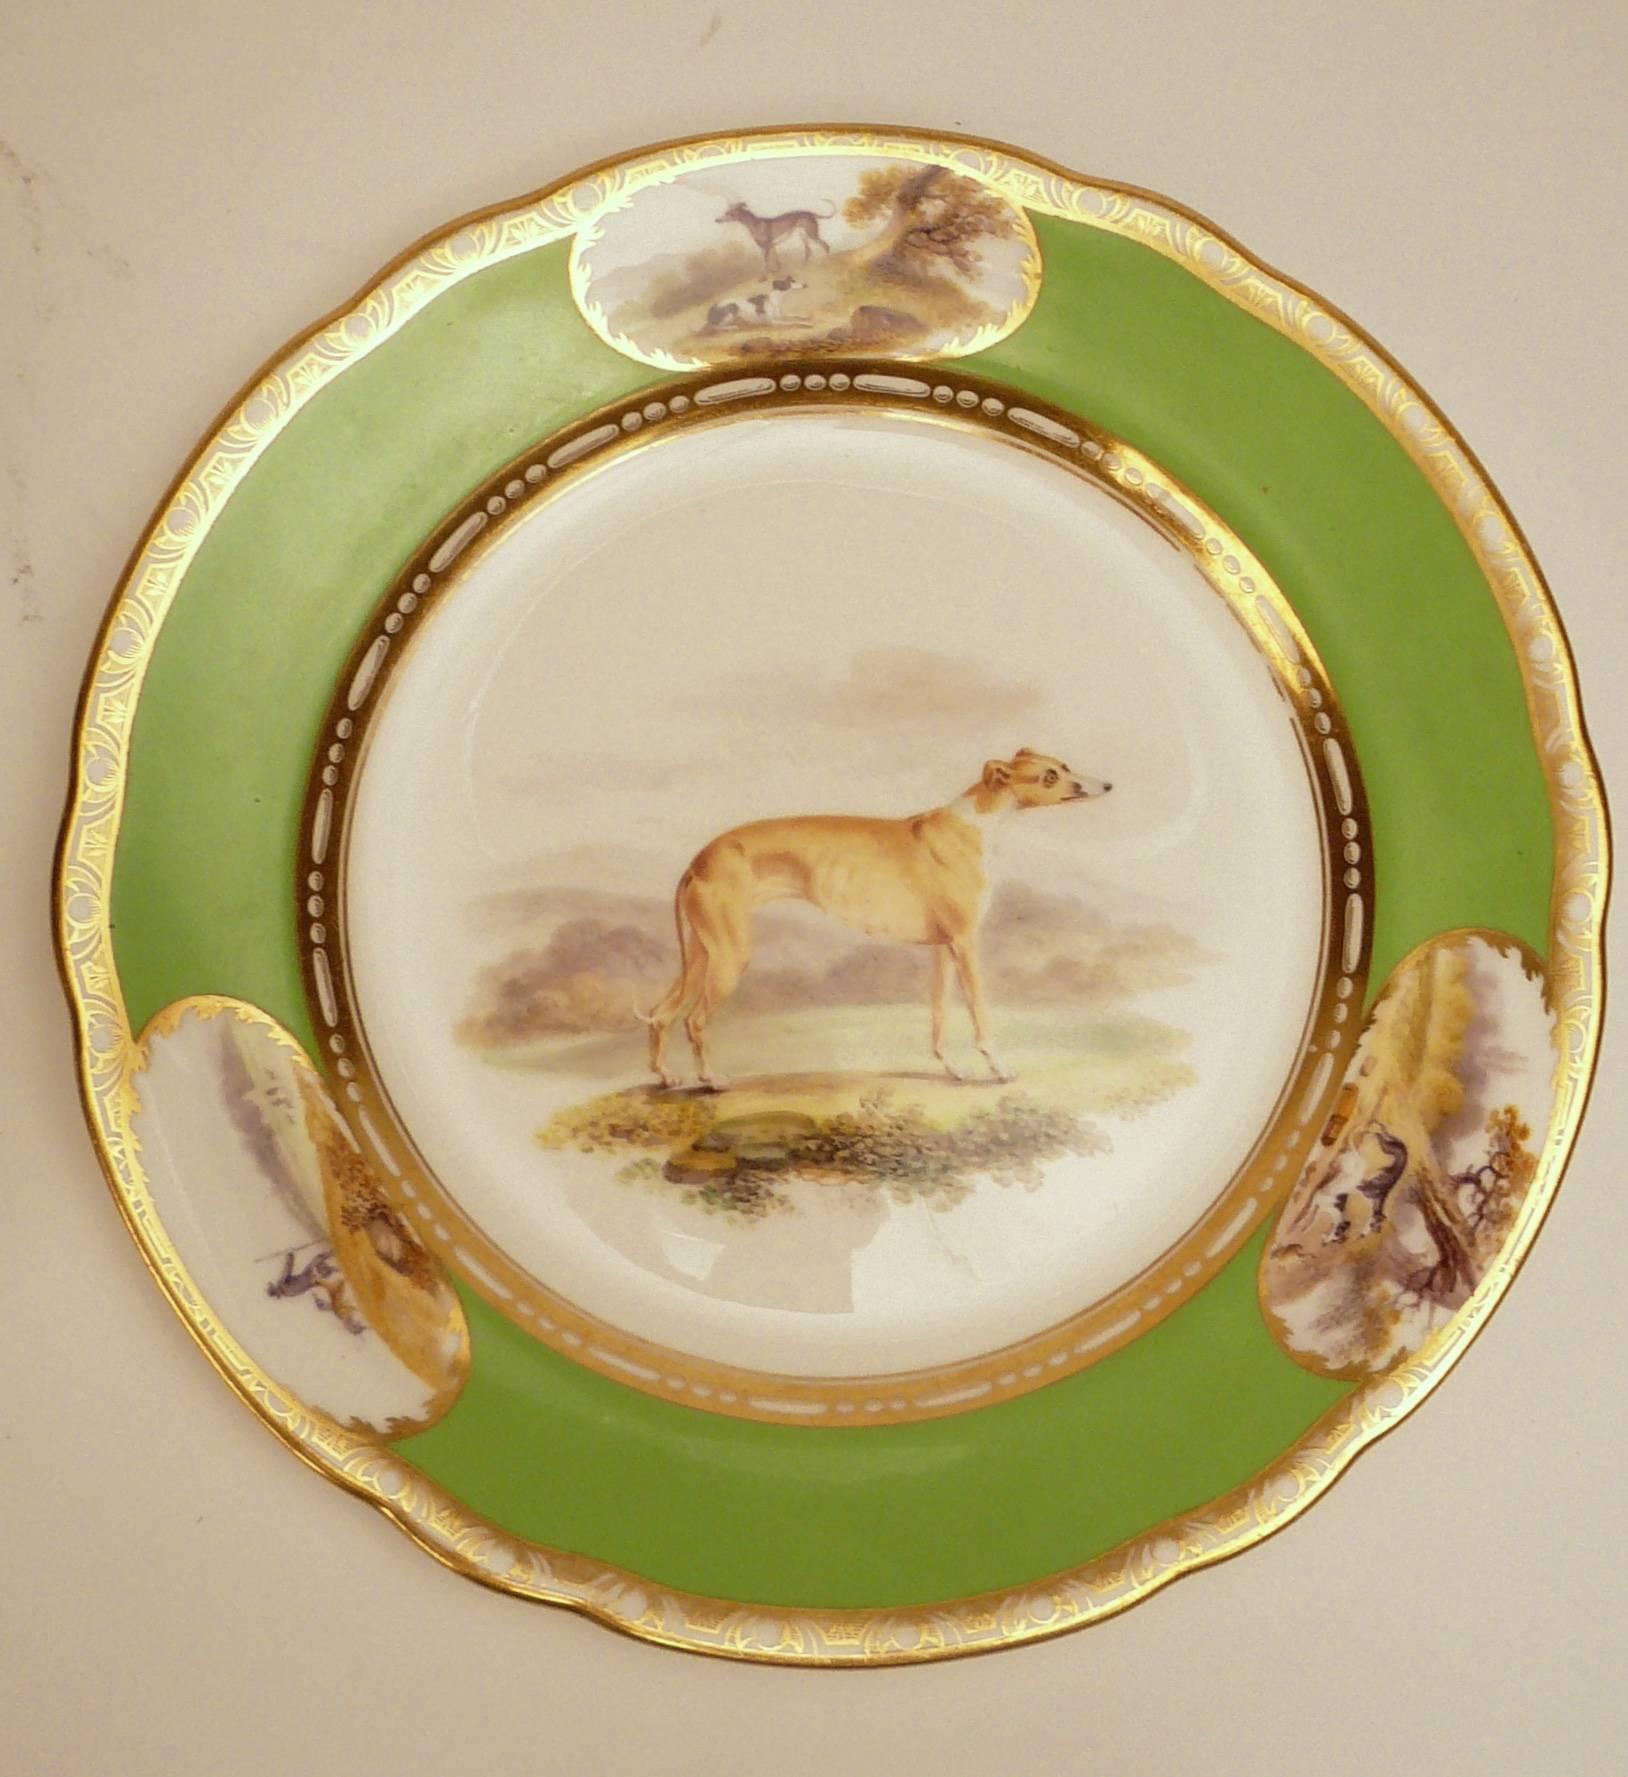 This fine pair of hand painted porcelain plates were painted by subscription, and were limited to an edition of thirty two, at the price of 20 guineas each. The plates feature well painted figures of greyhounds in a landscape, winners of the English